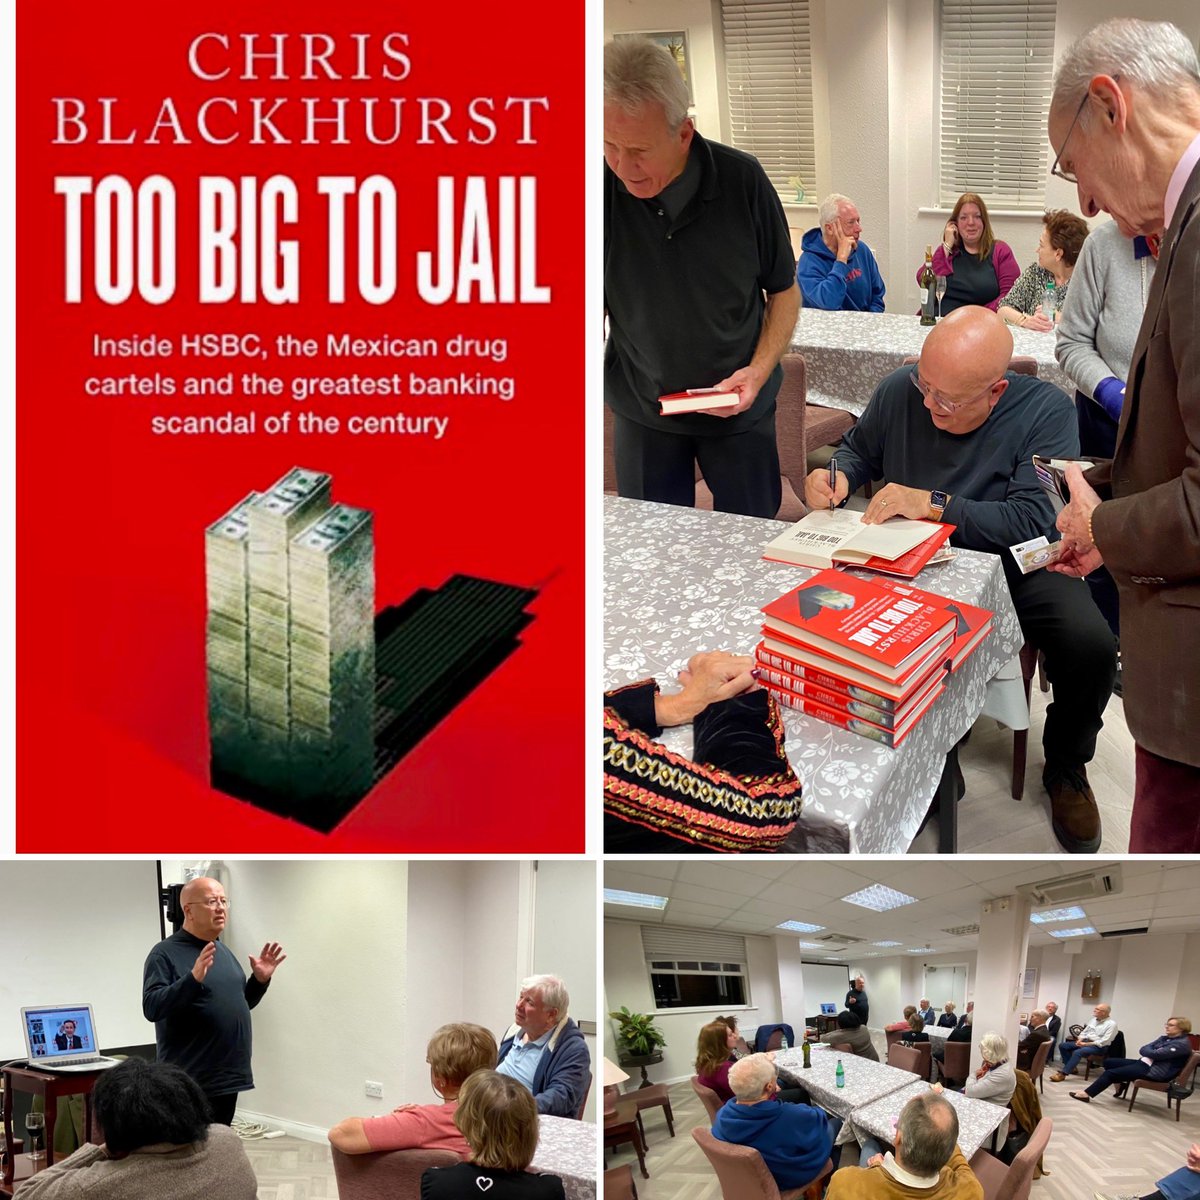 Very pleased to have @c_blackhurst talking about his book 'Too Big to Jail: Inside HSBC, the Mexican Drug Cartels and the Greatest Banking Scandals of the Century.' Want to know how politics interacts with very big business? Read this book.